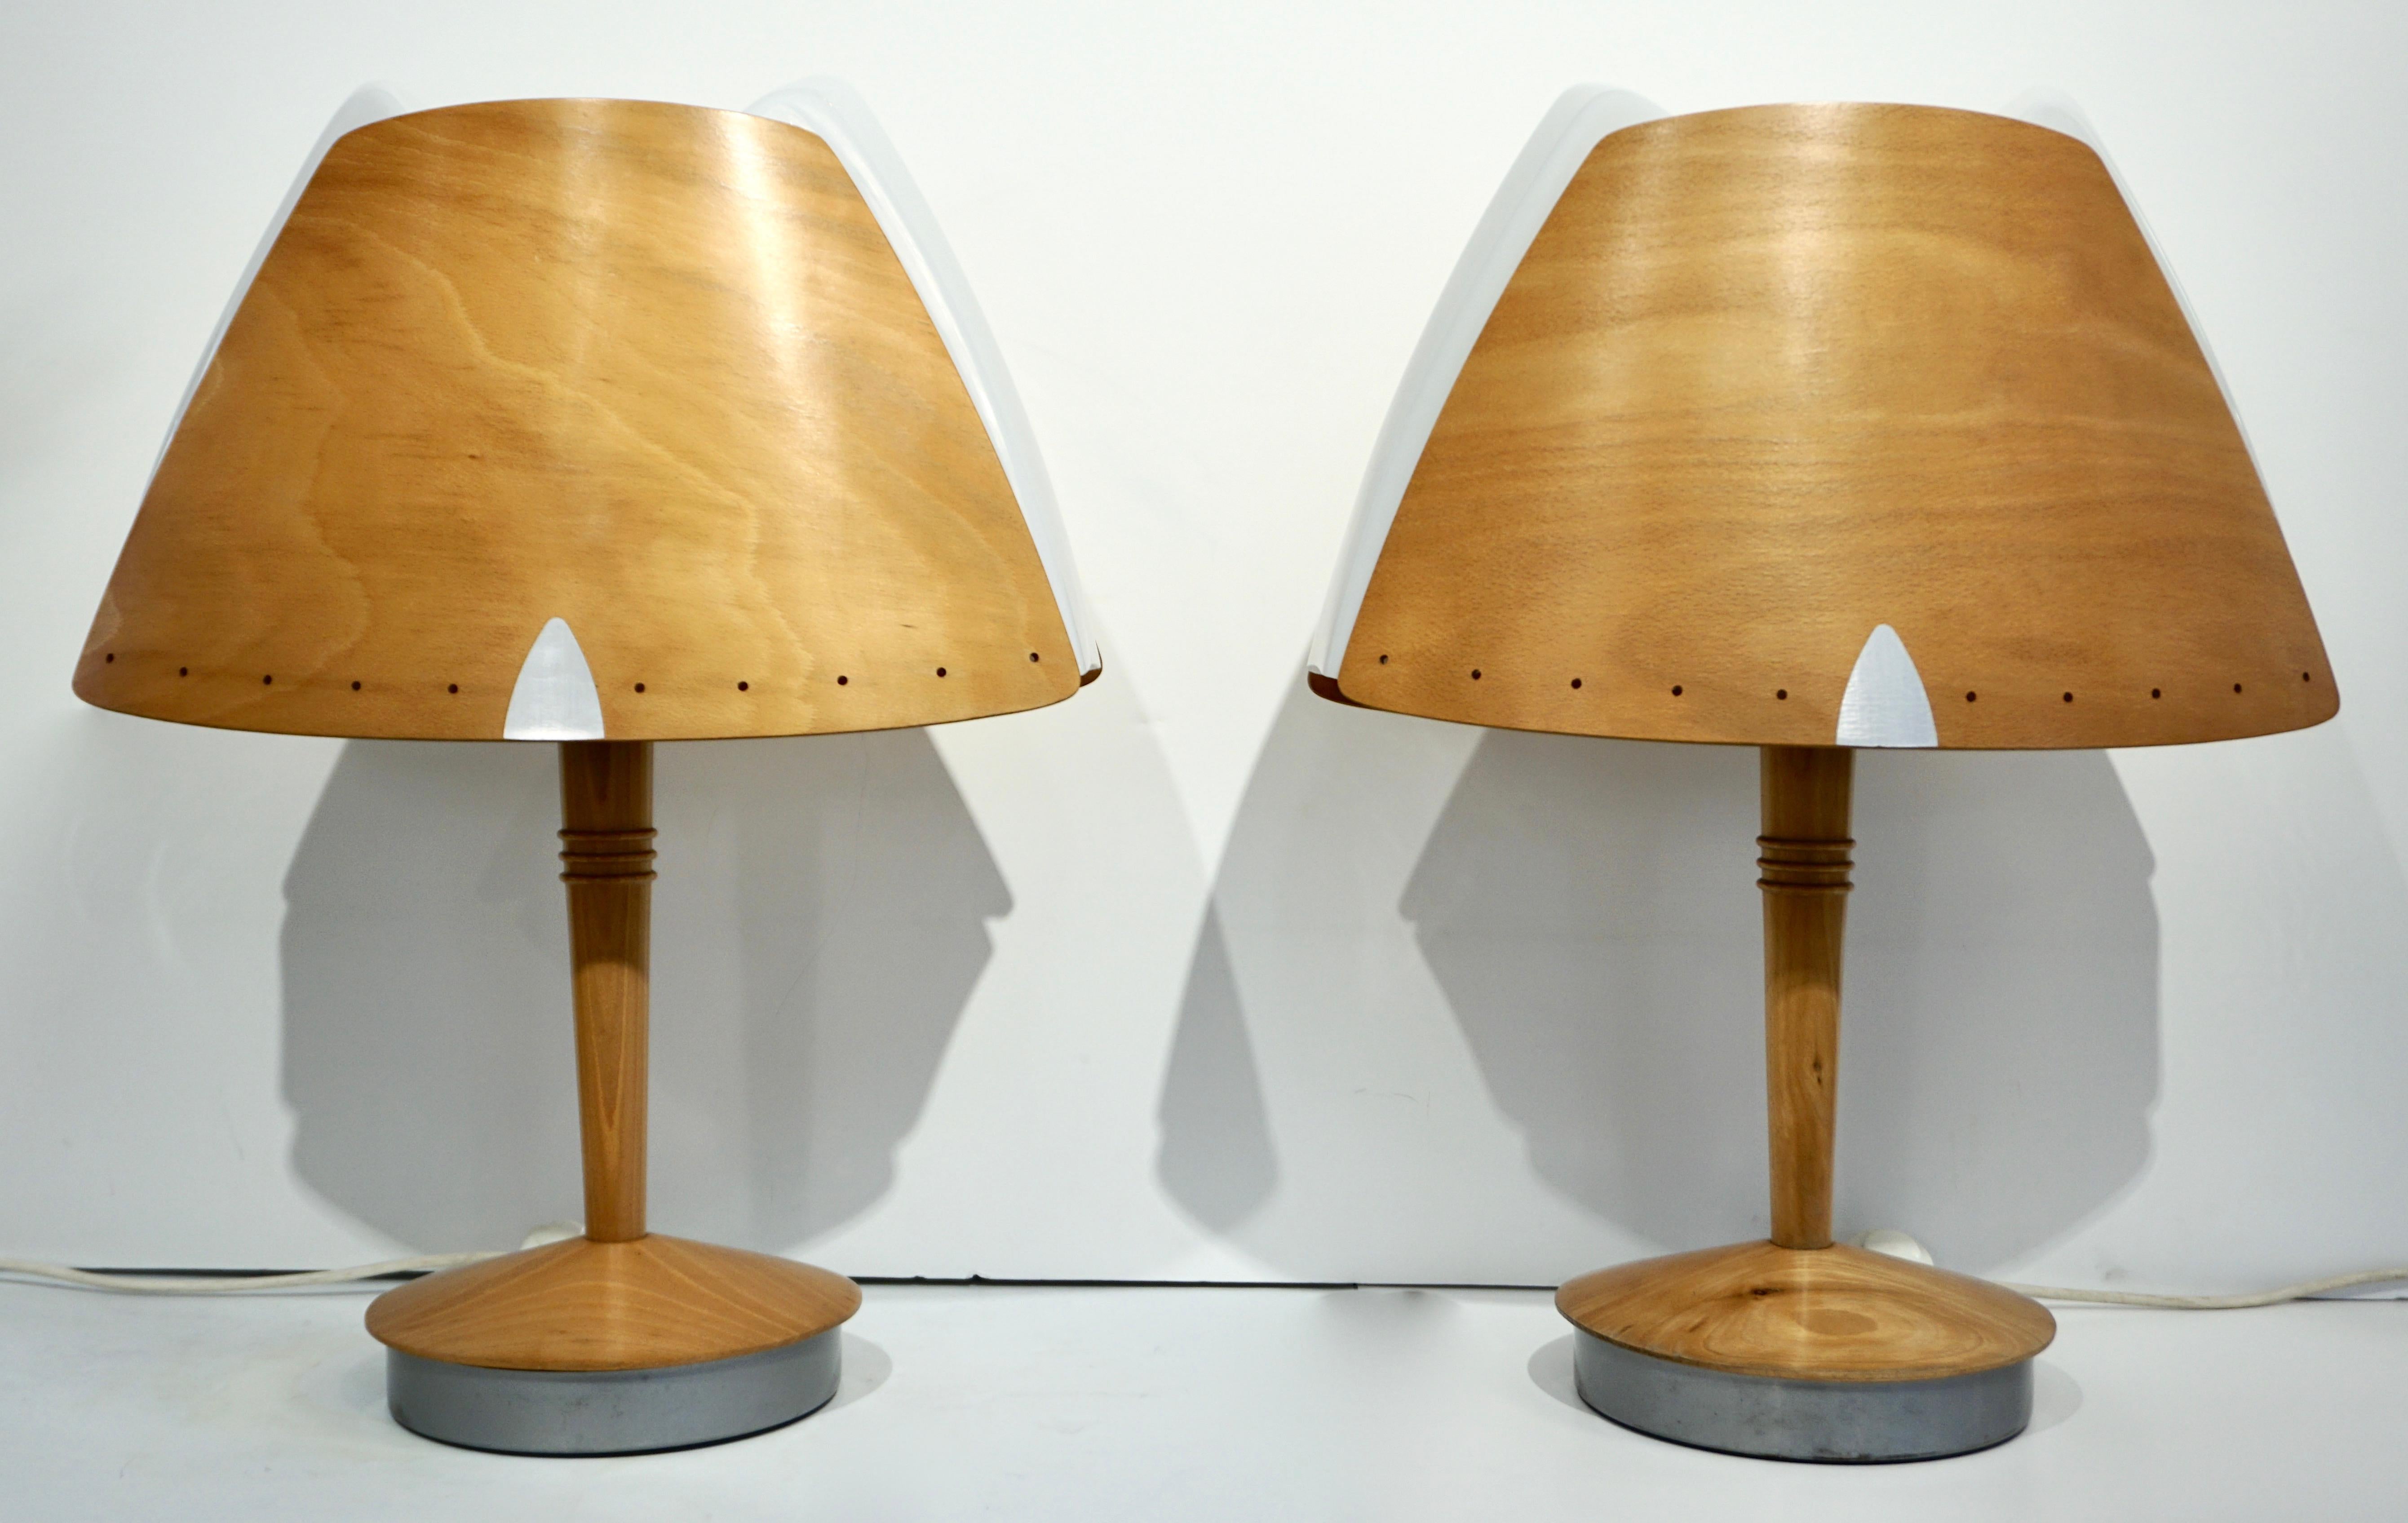 1970 French Pair of Birch Wood and Acrylic Table Lamp for Barcelona Hilton Hotel For Sale 5